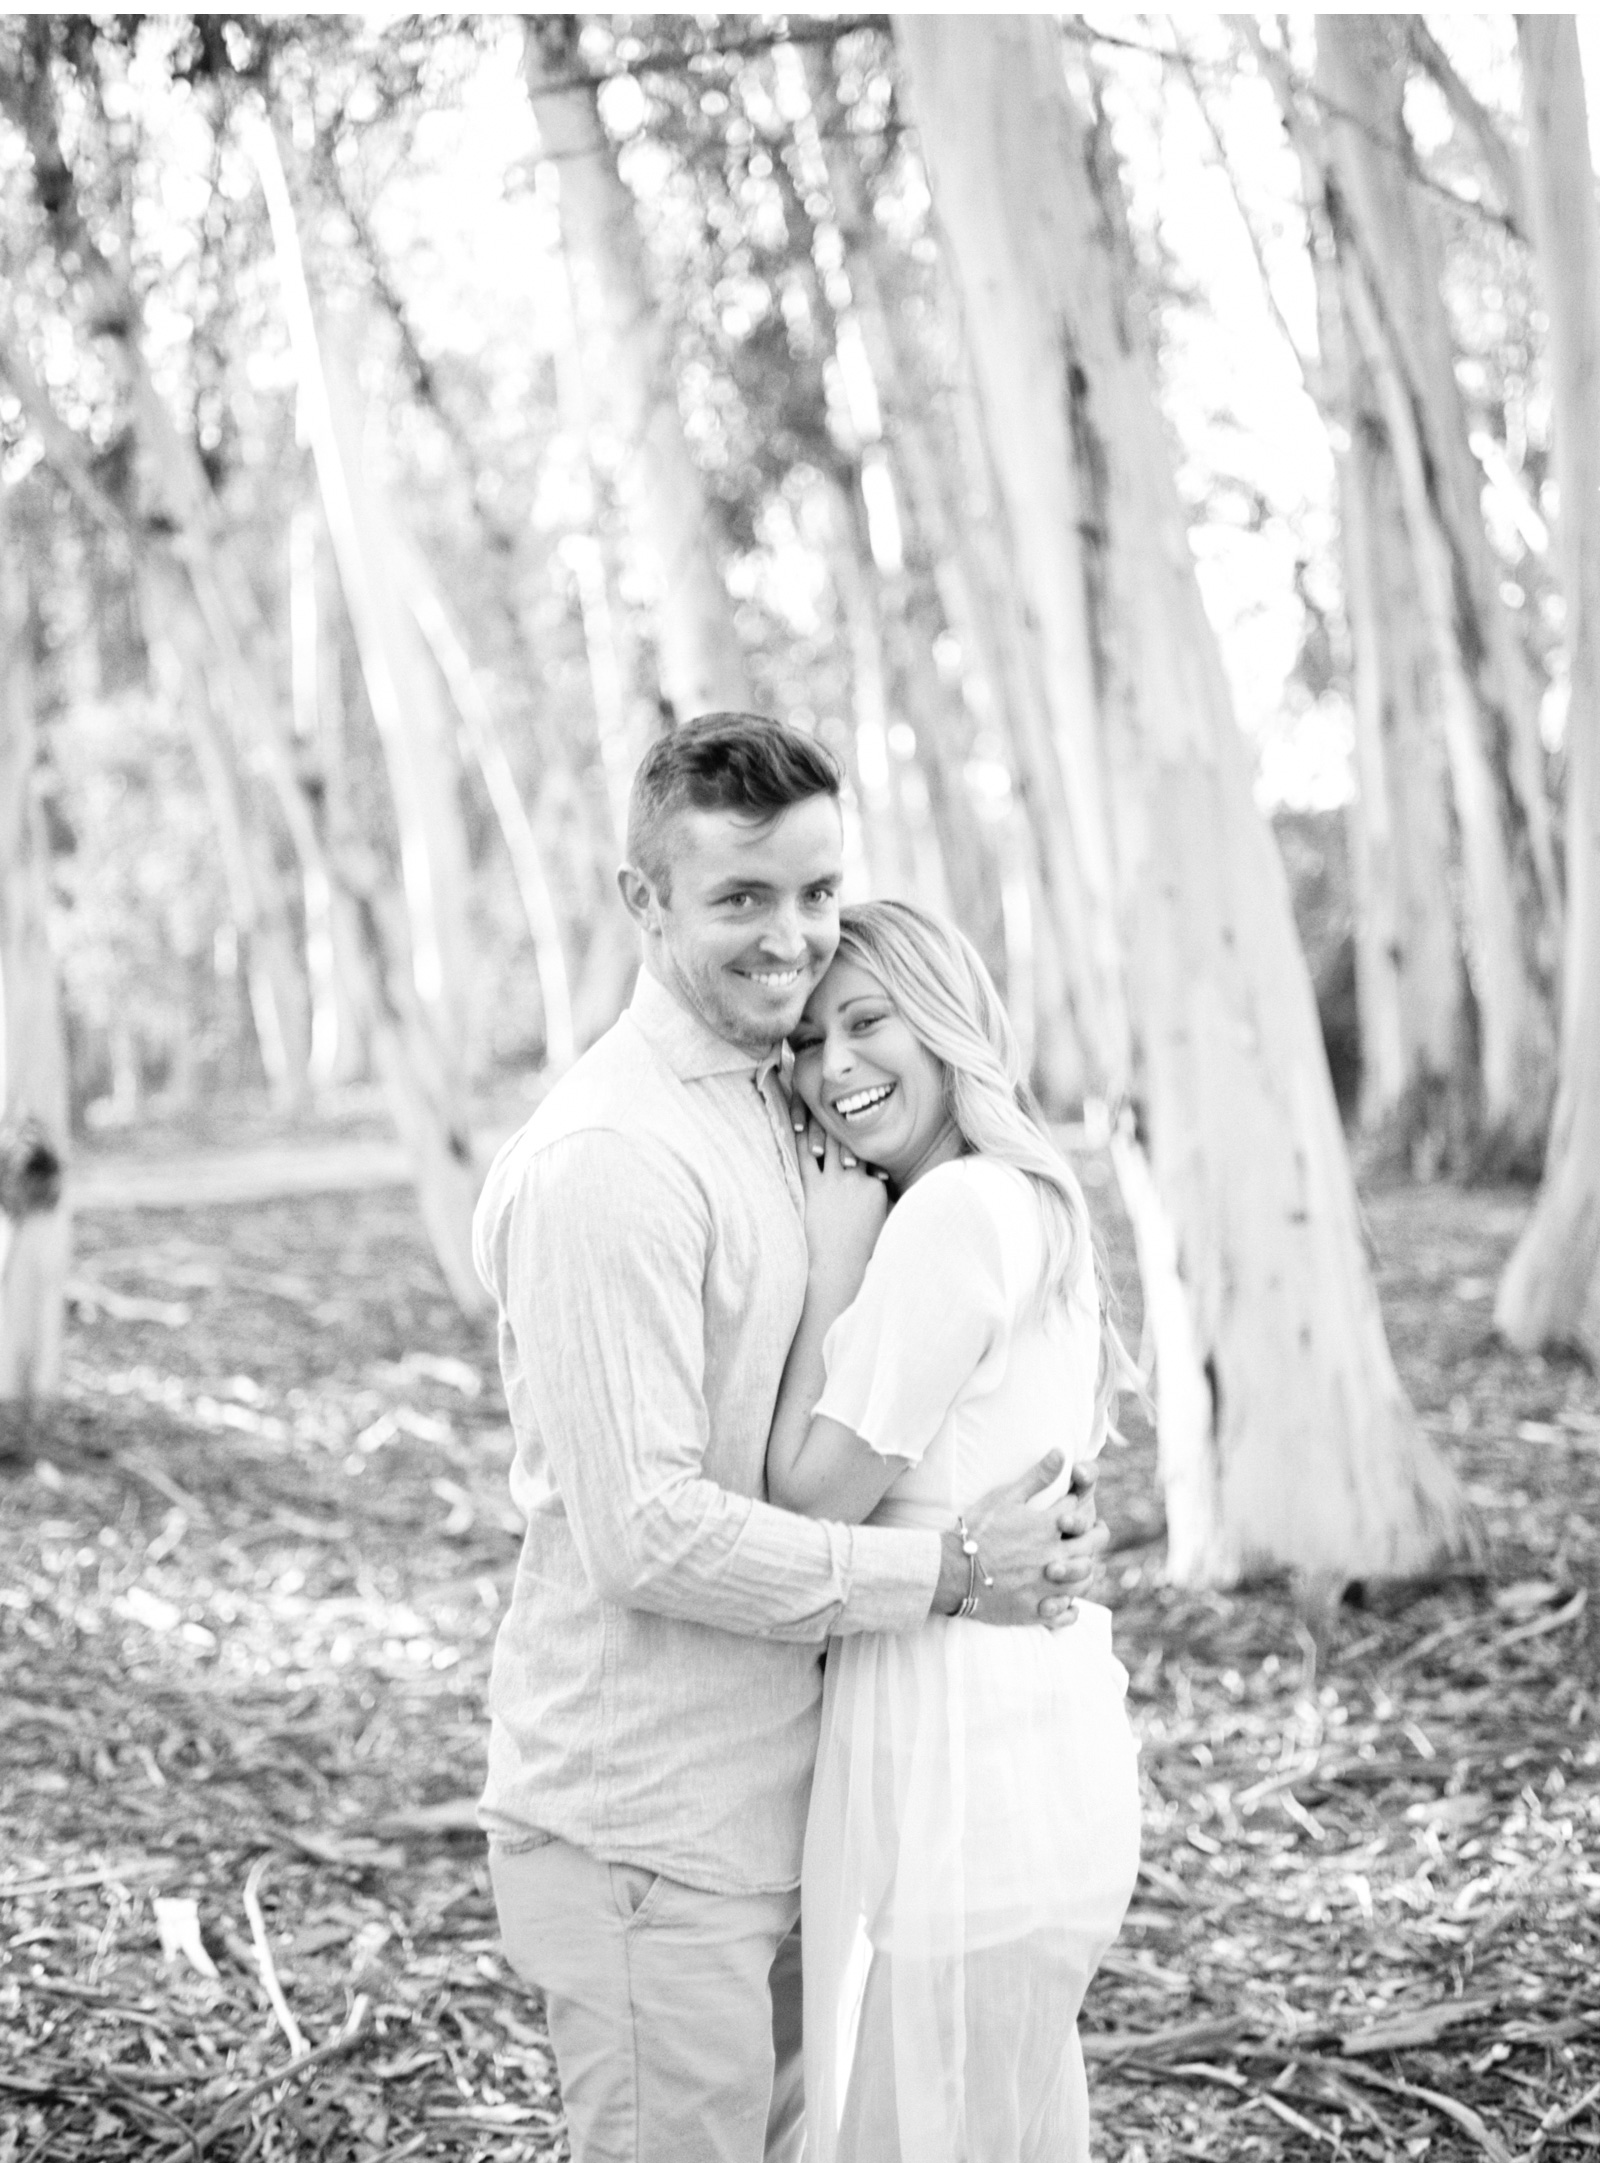 Wes & Lo — Natalie Schutt Photography